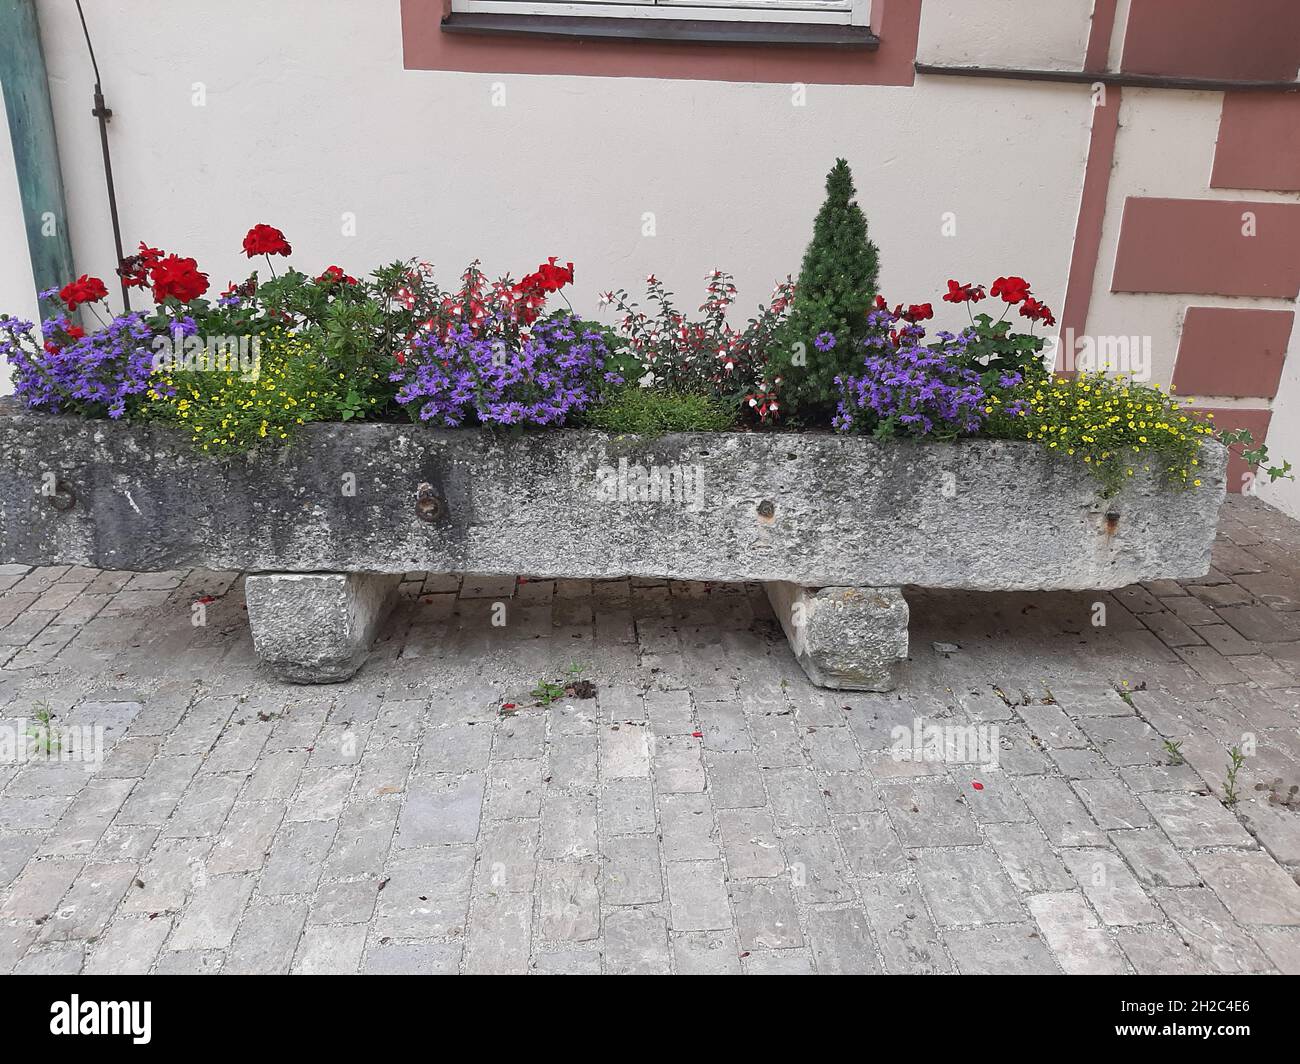 concrete flowerbox on a pavement, Germany Stock Photo